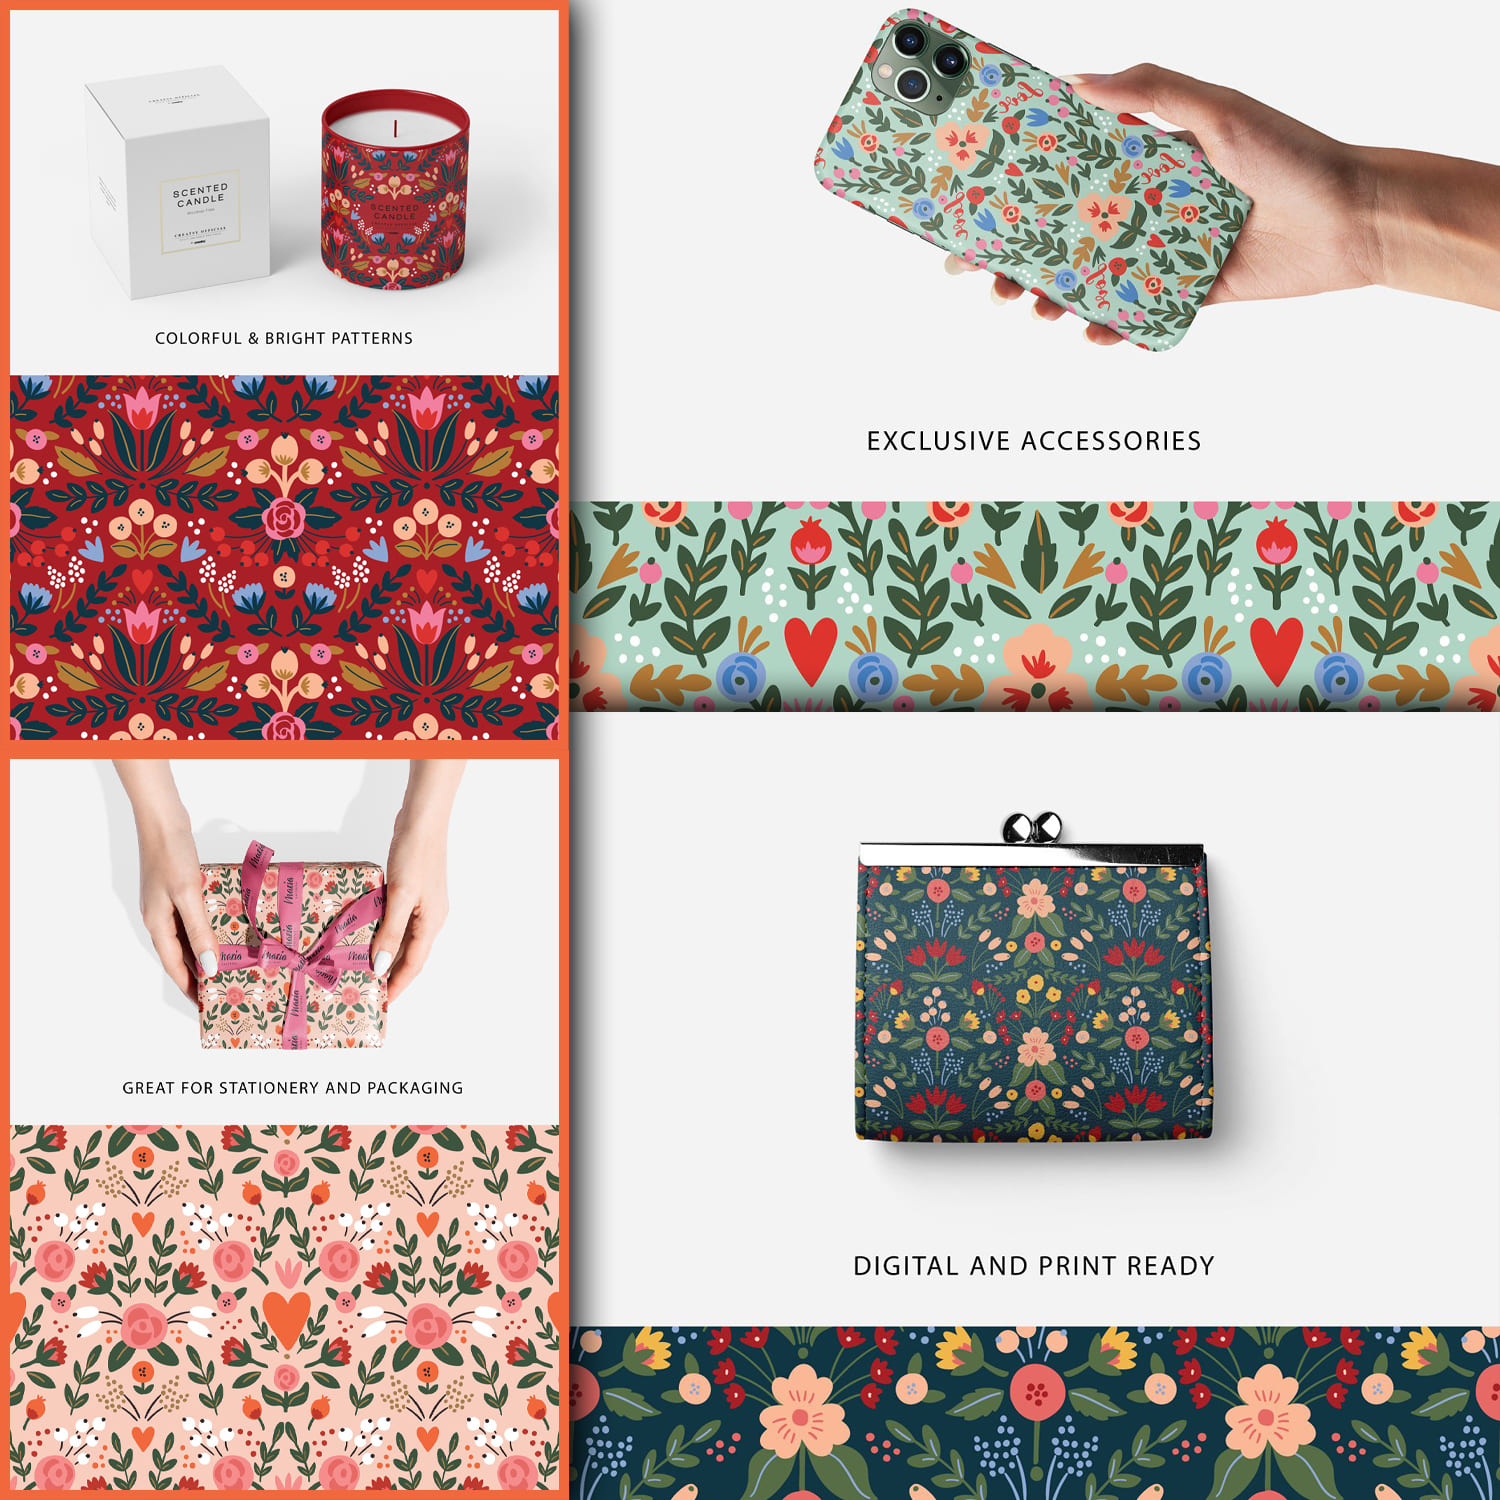 Examples of using Mon Amour patterns in the design of candles, phones, wallets, and gifts.